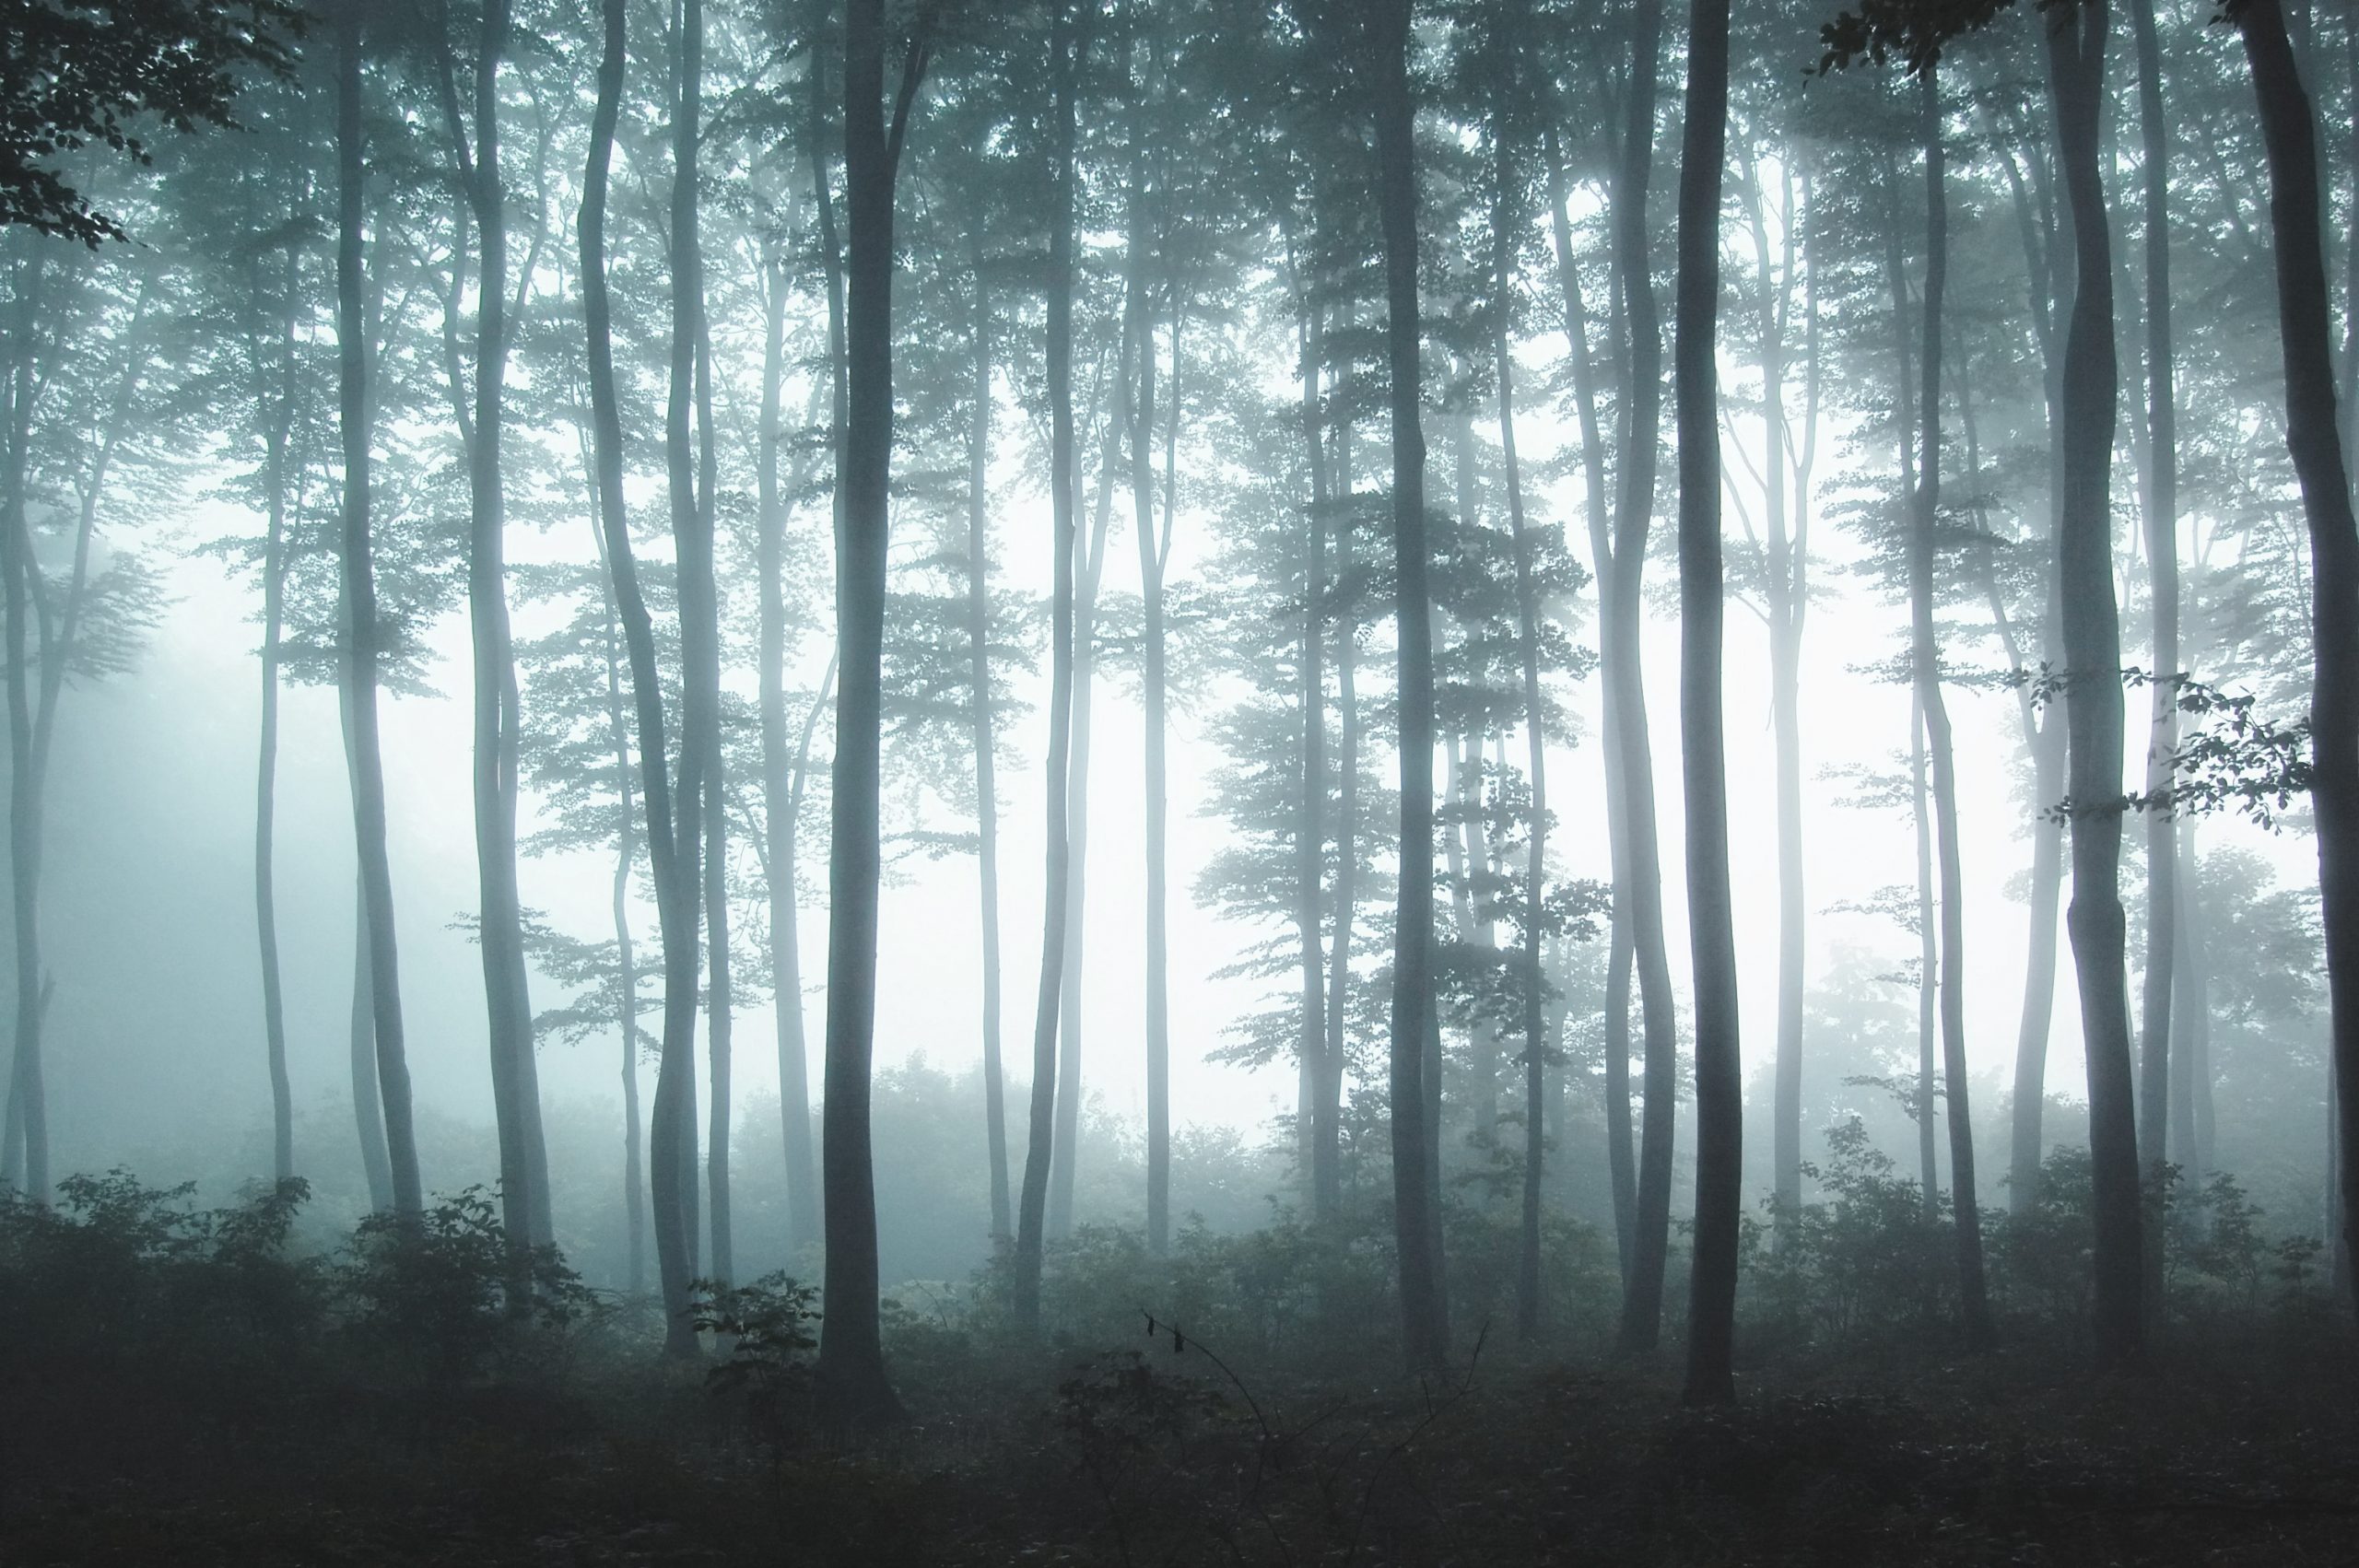 Dreamy misty forest haze - a great outdoor image for your wall - Custom  Wallpaper